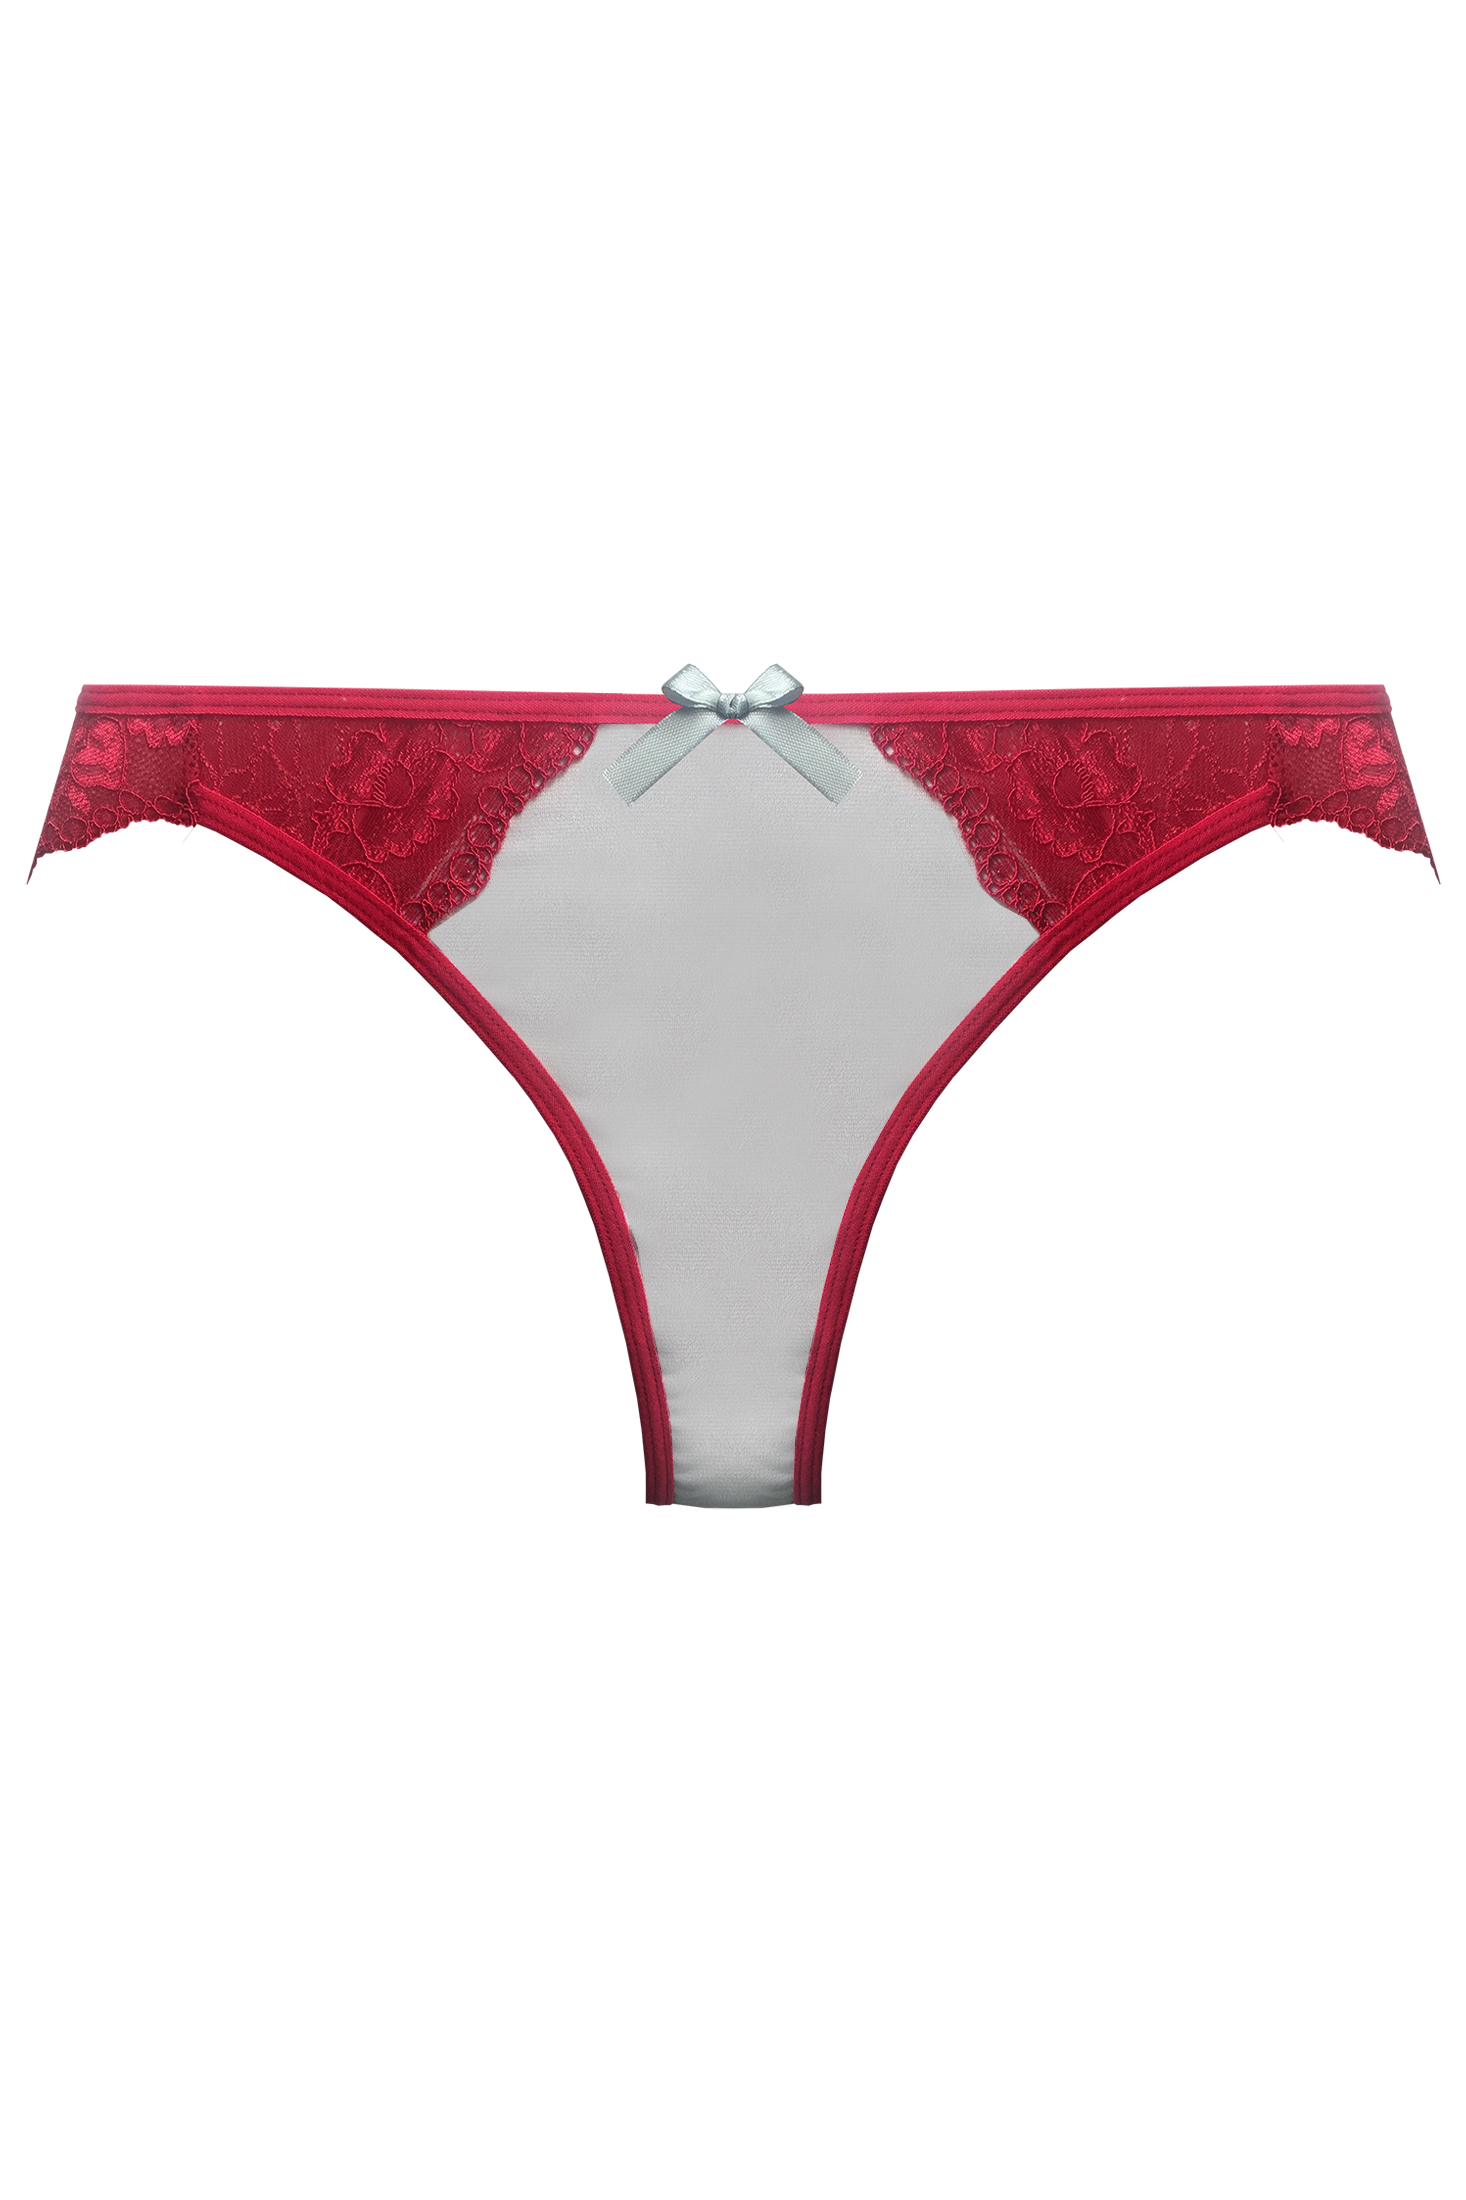 LL GREY & RED LACE THONG - Lingerie Letters